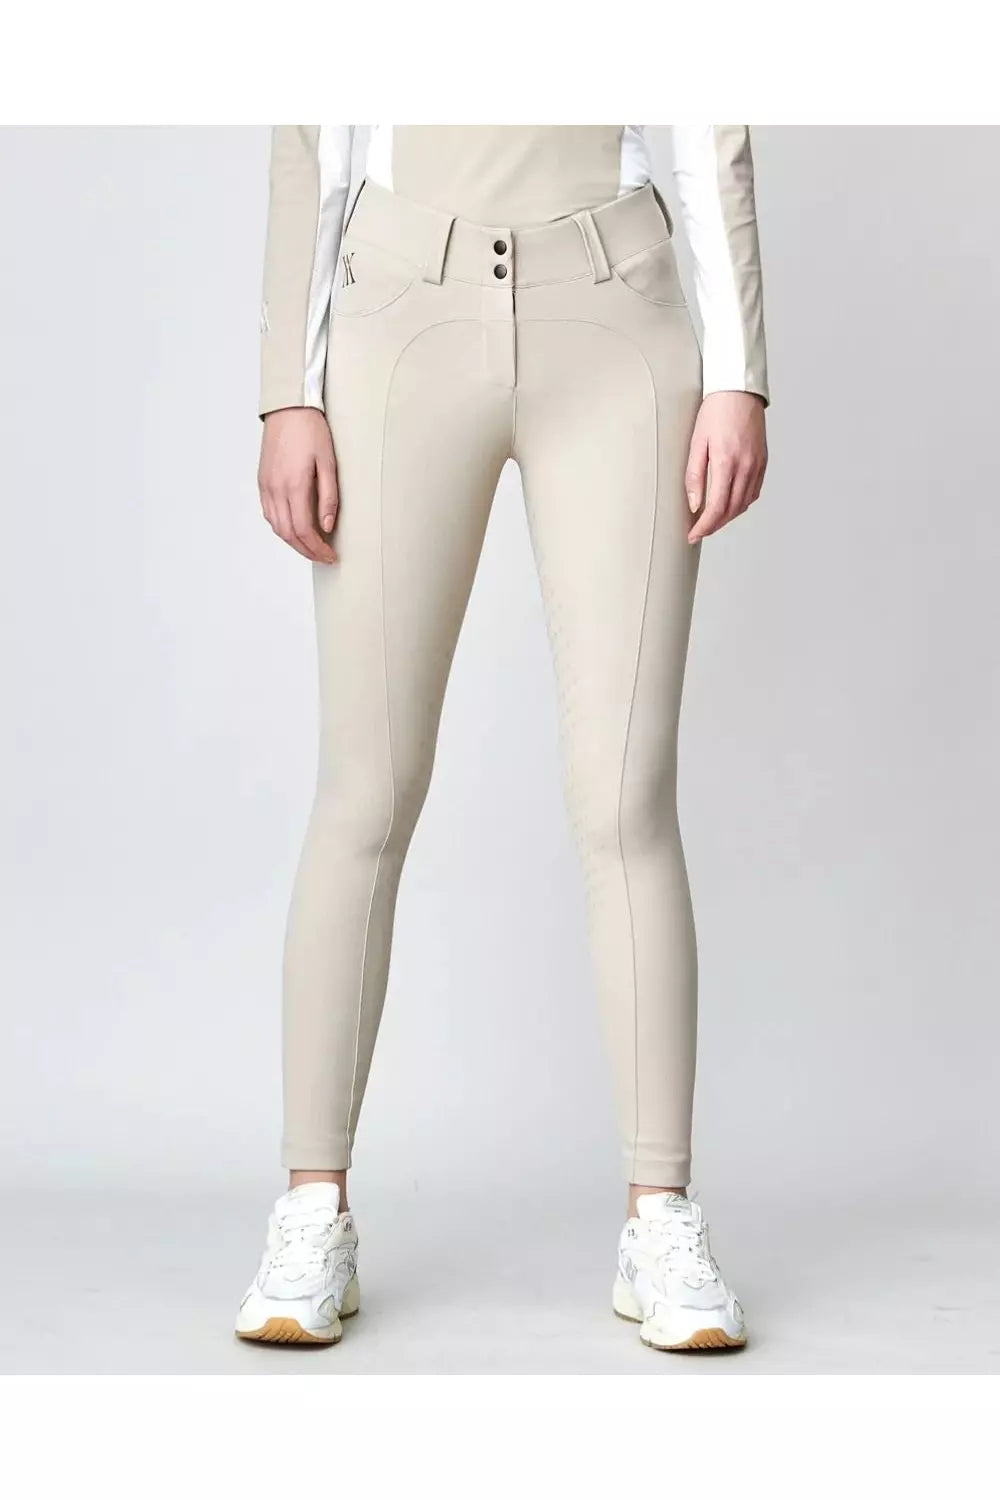 Compression Performance Breeches - Full Seat